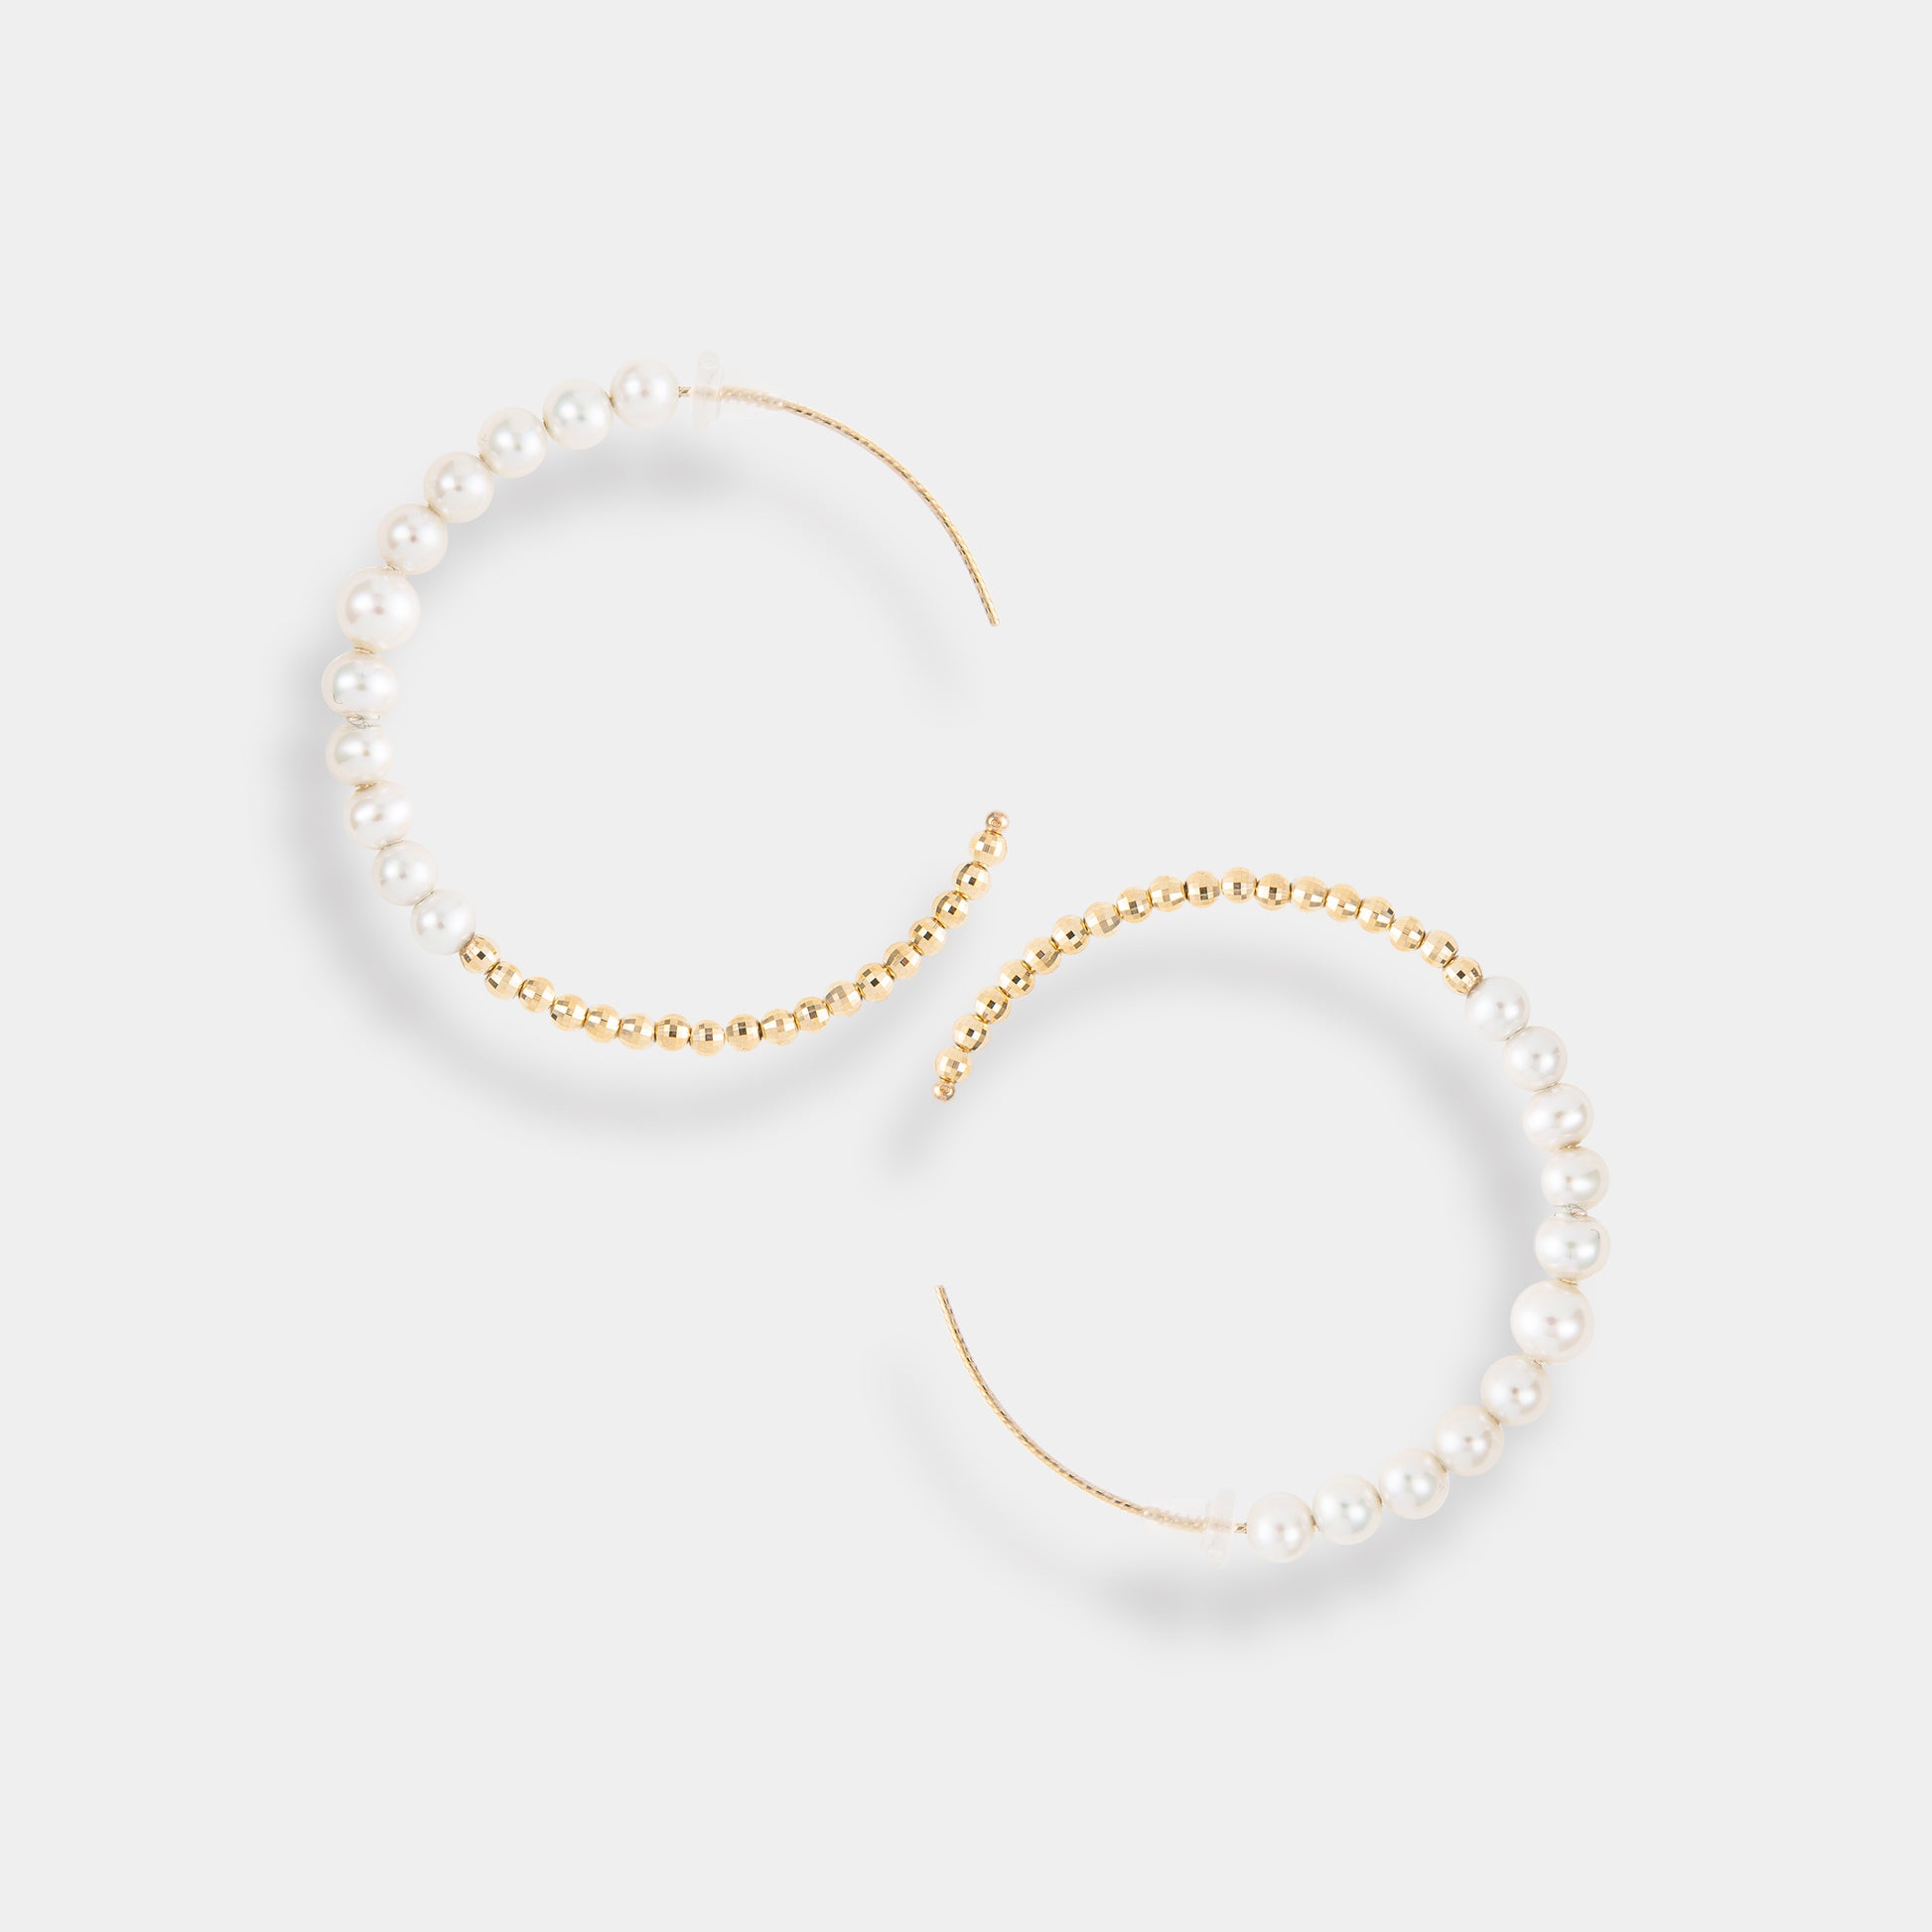 Luxurious gold hoops adorned with beautiful pearls, a must-have accessory for a glamorous look.